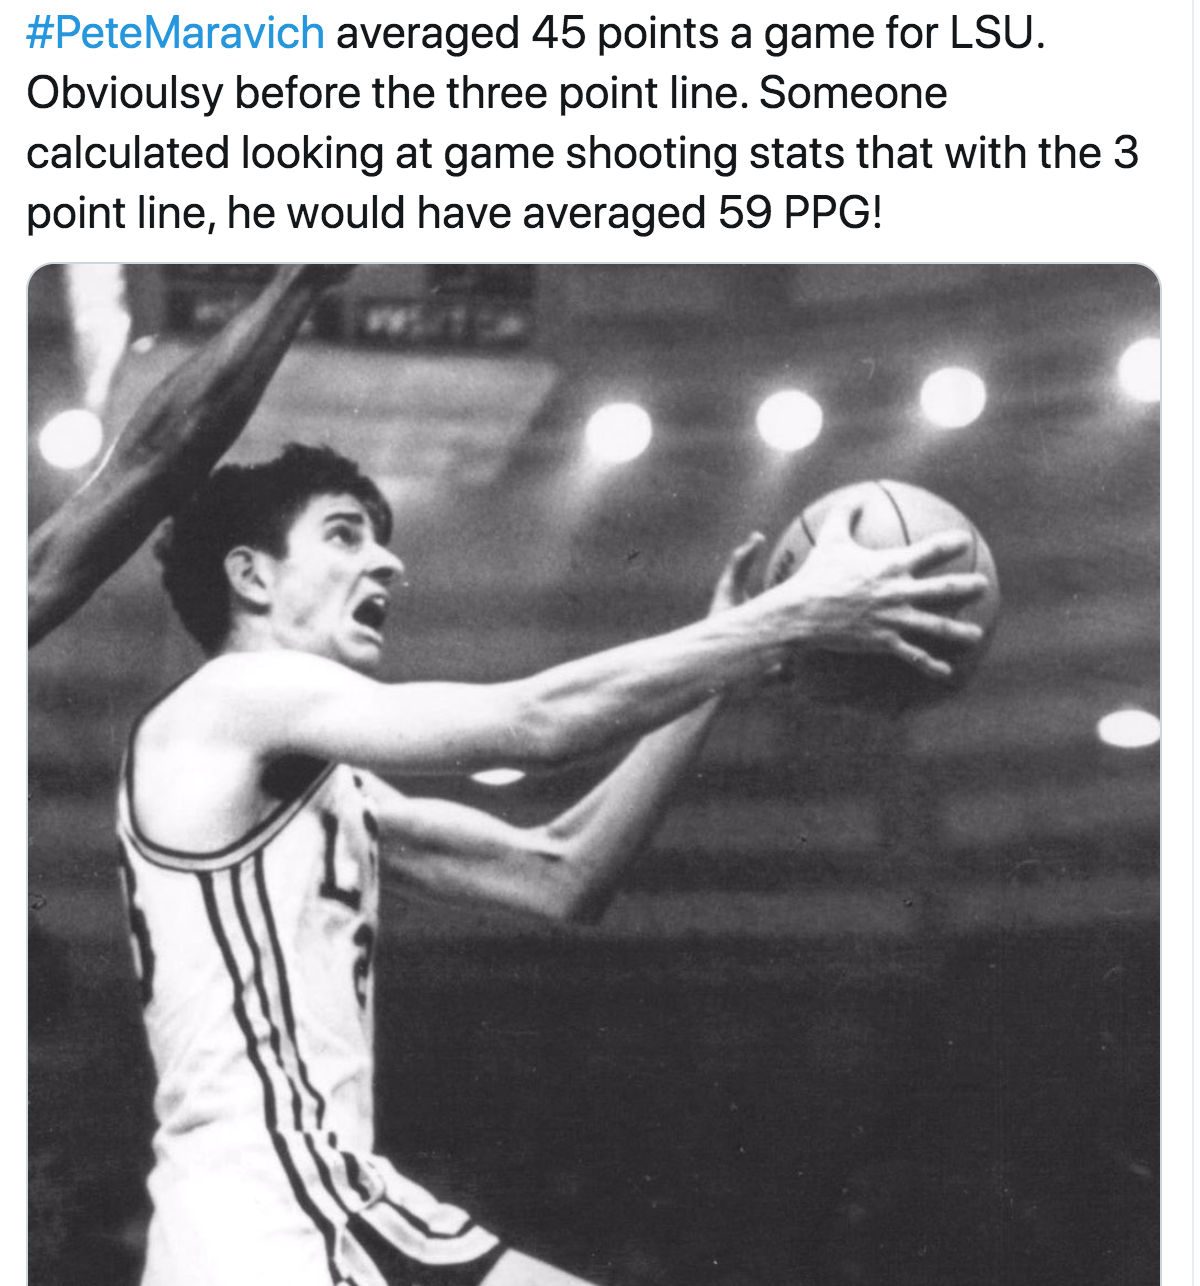 pete maravich lsu - Maravich averaged 45 points a game for Lsu. Obvioulsy before the three point line. Someone calculated looking at game shooting stats that with the 3 point line, he would have averaged 59 Ppg!